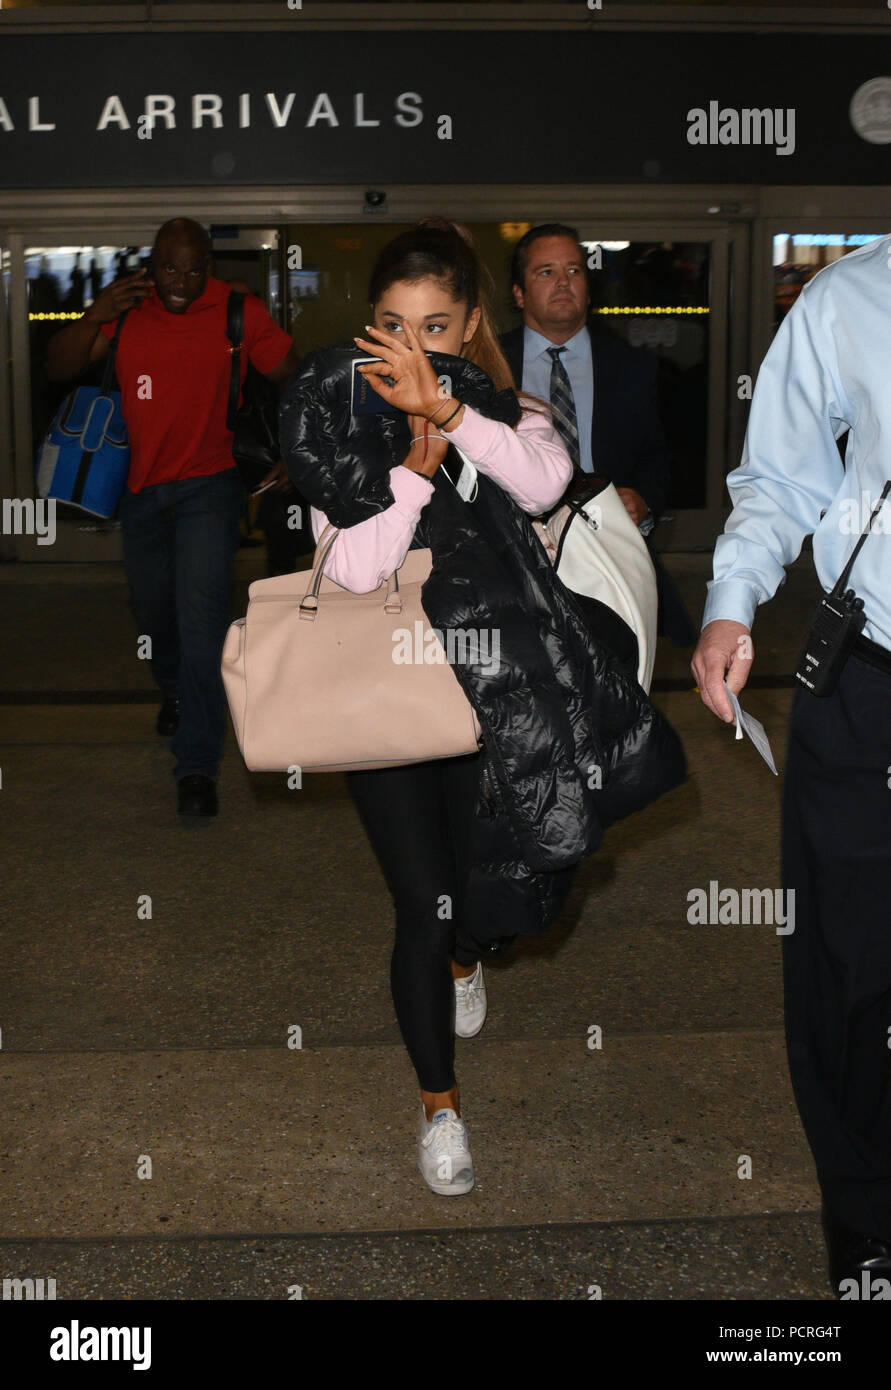 LOS ANGELES, CA - JULY 03: Ariana Grande was feeling coy and maybe